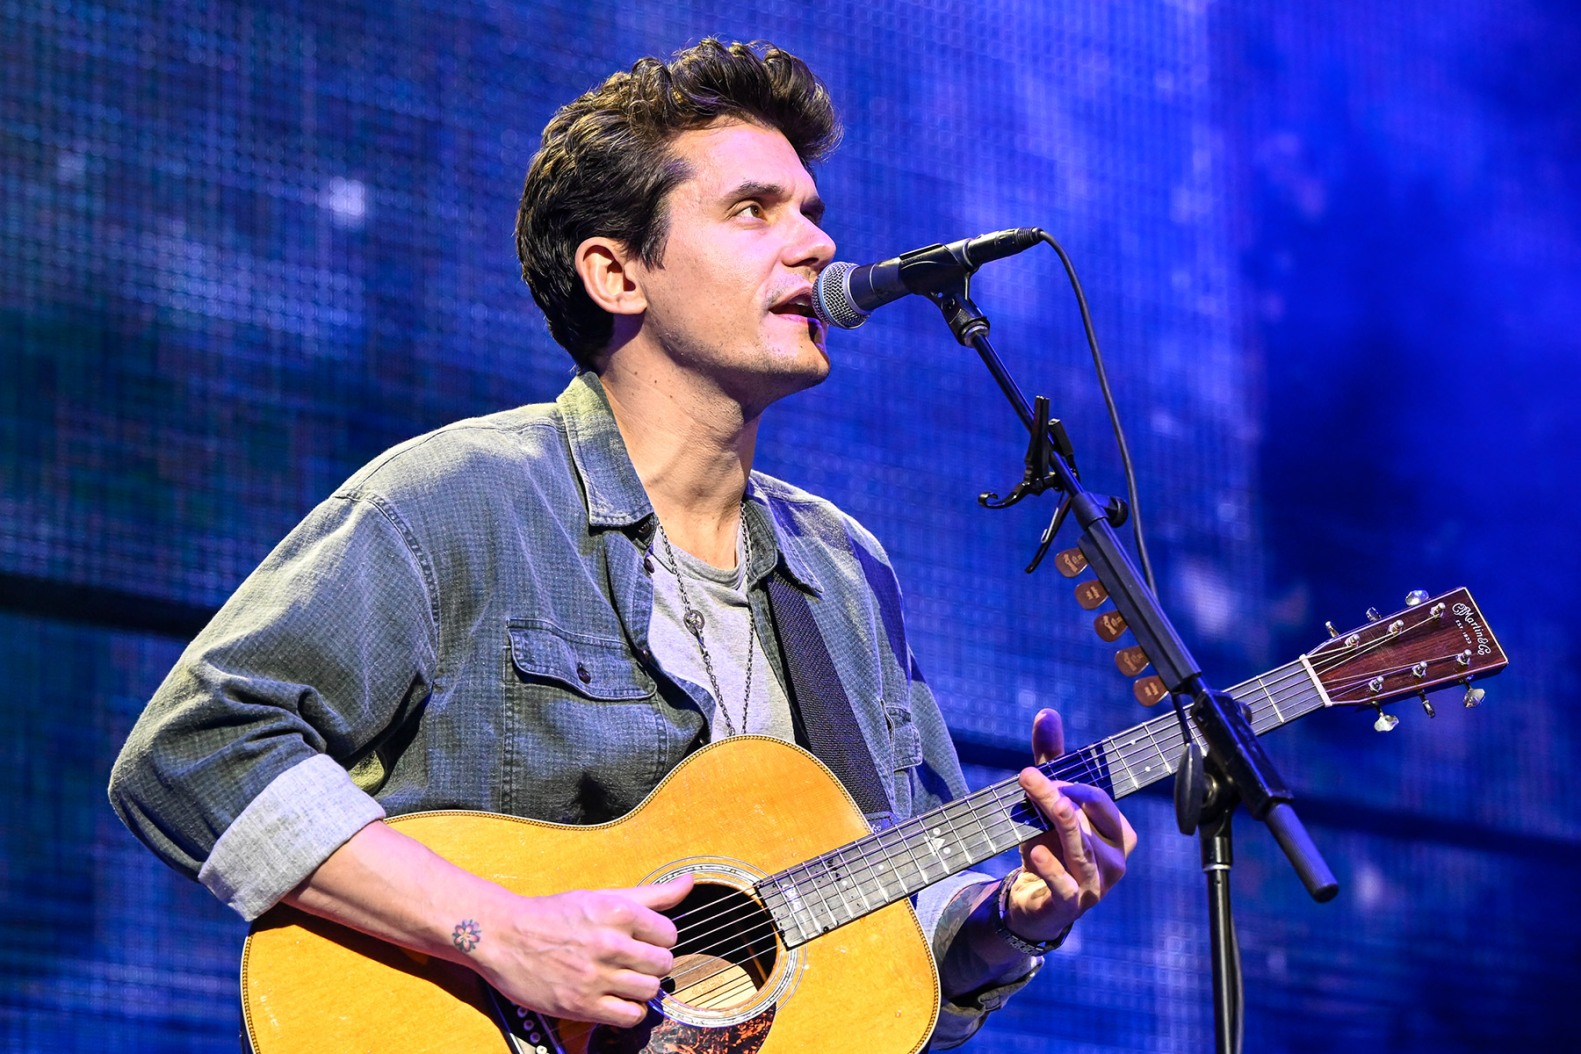 John Mayer Concert Live Stream, Date, Location and Tickets info